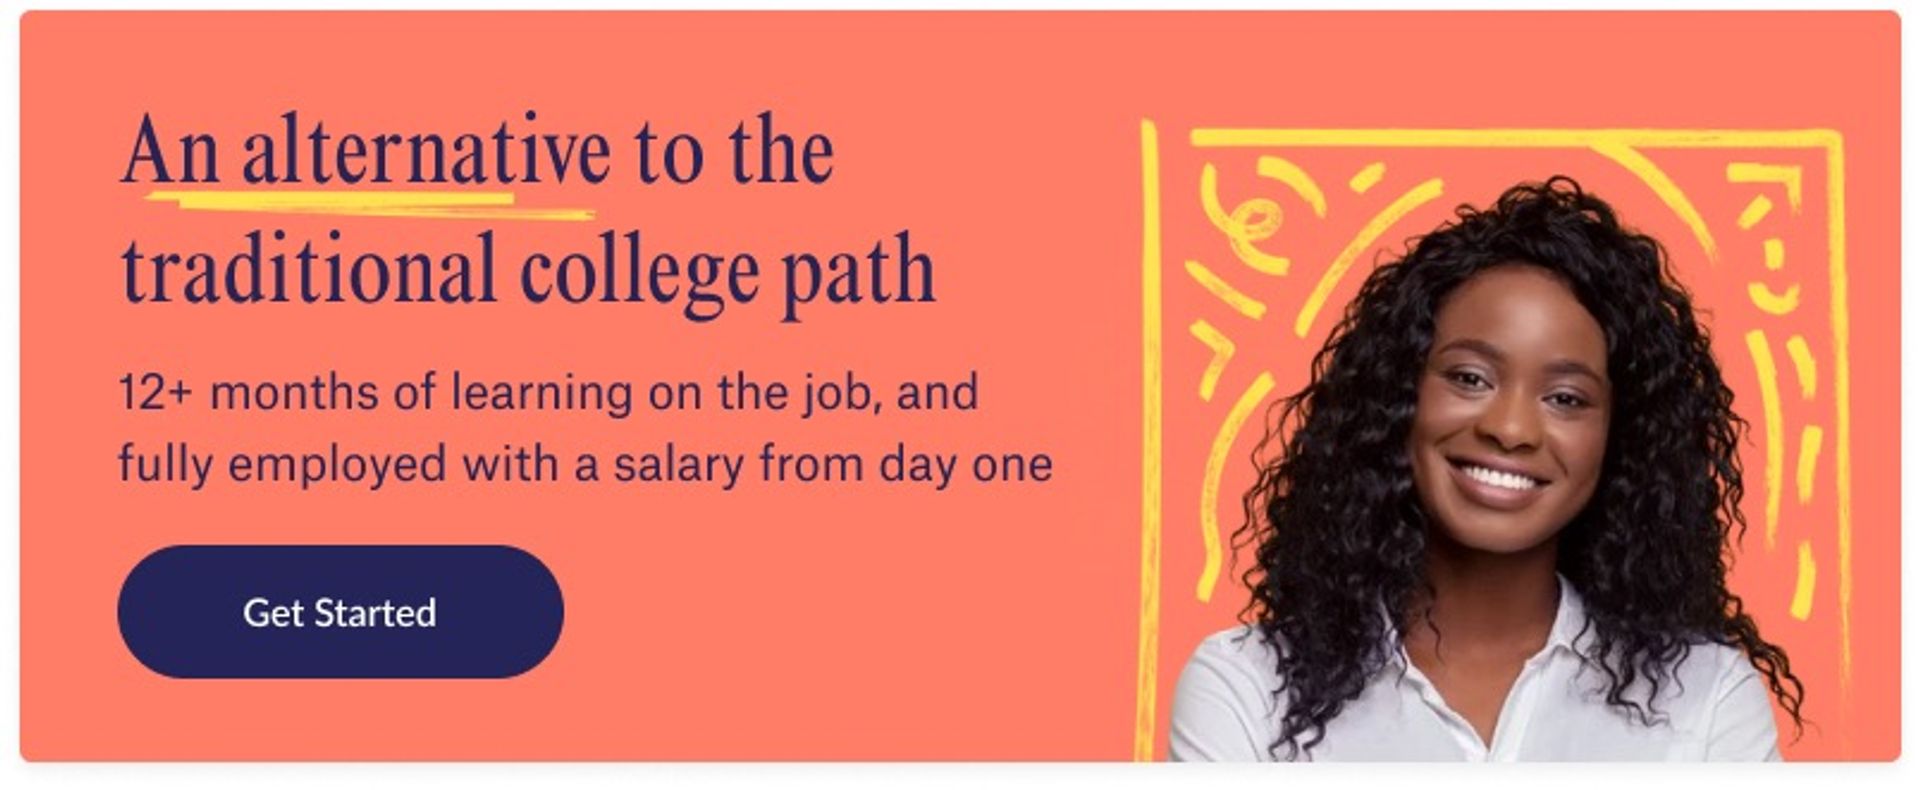 an alternative to the traditional college path orange cta